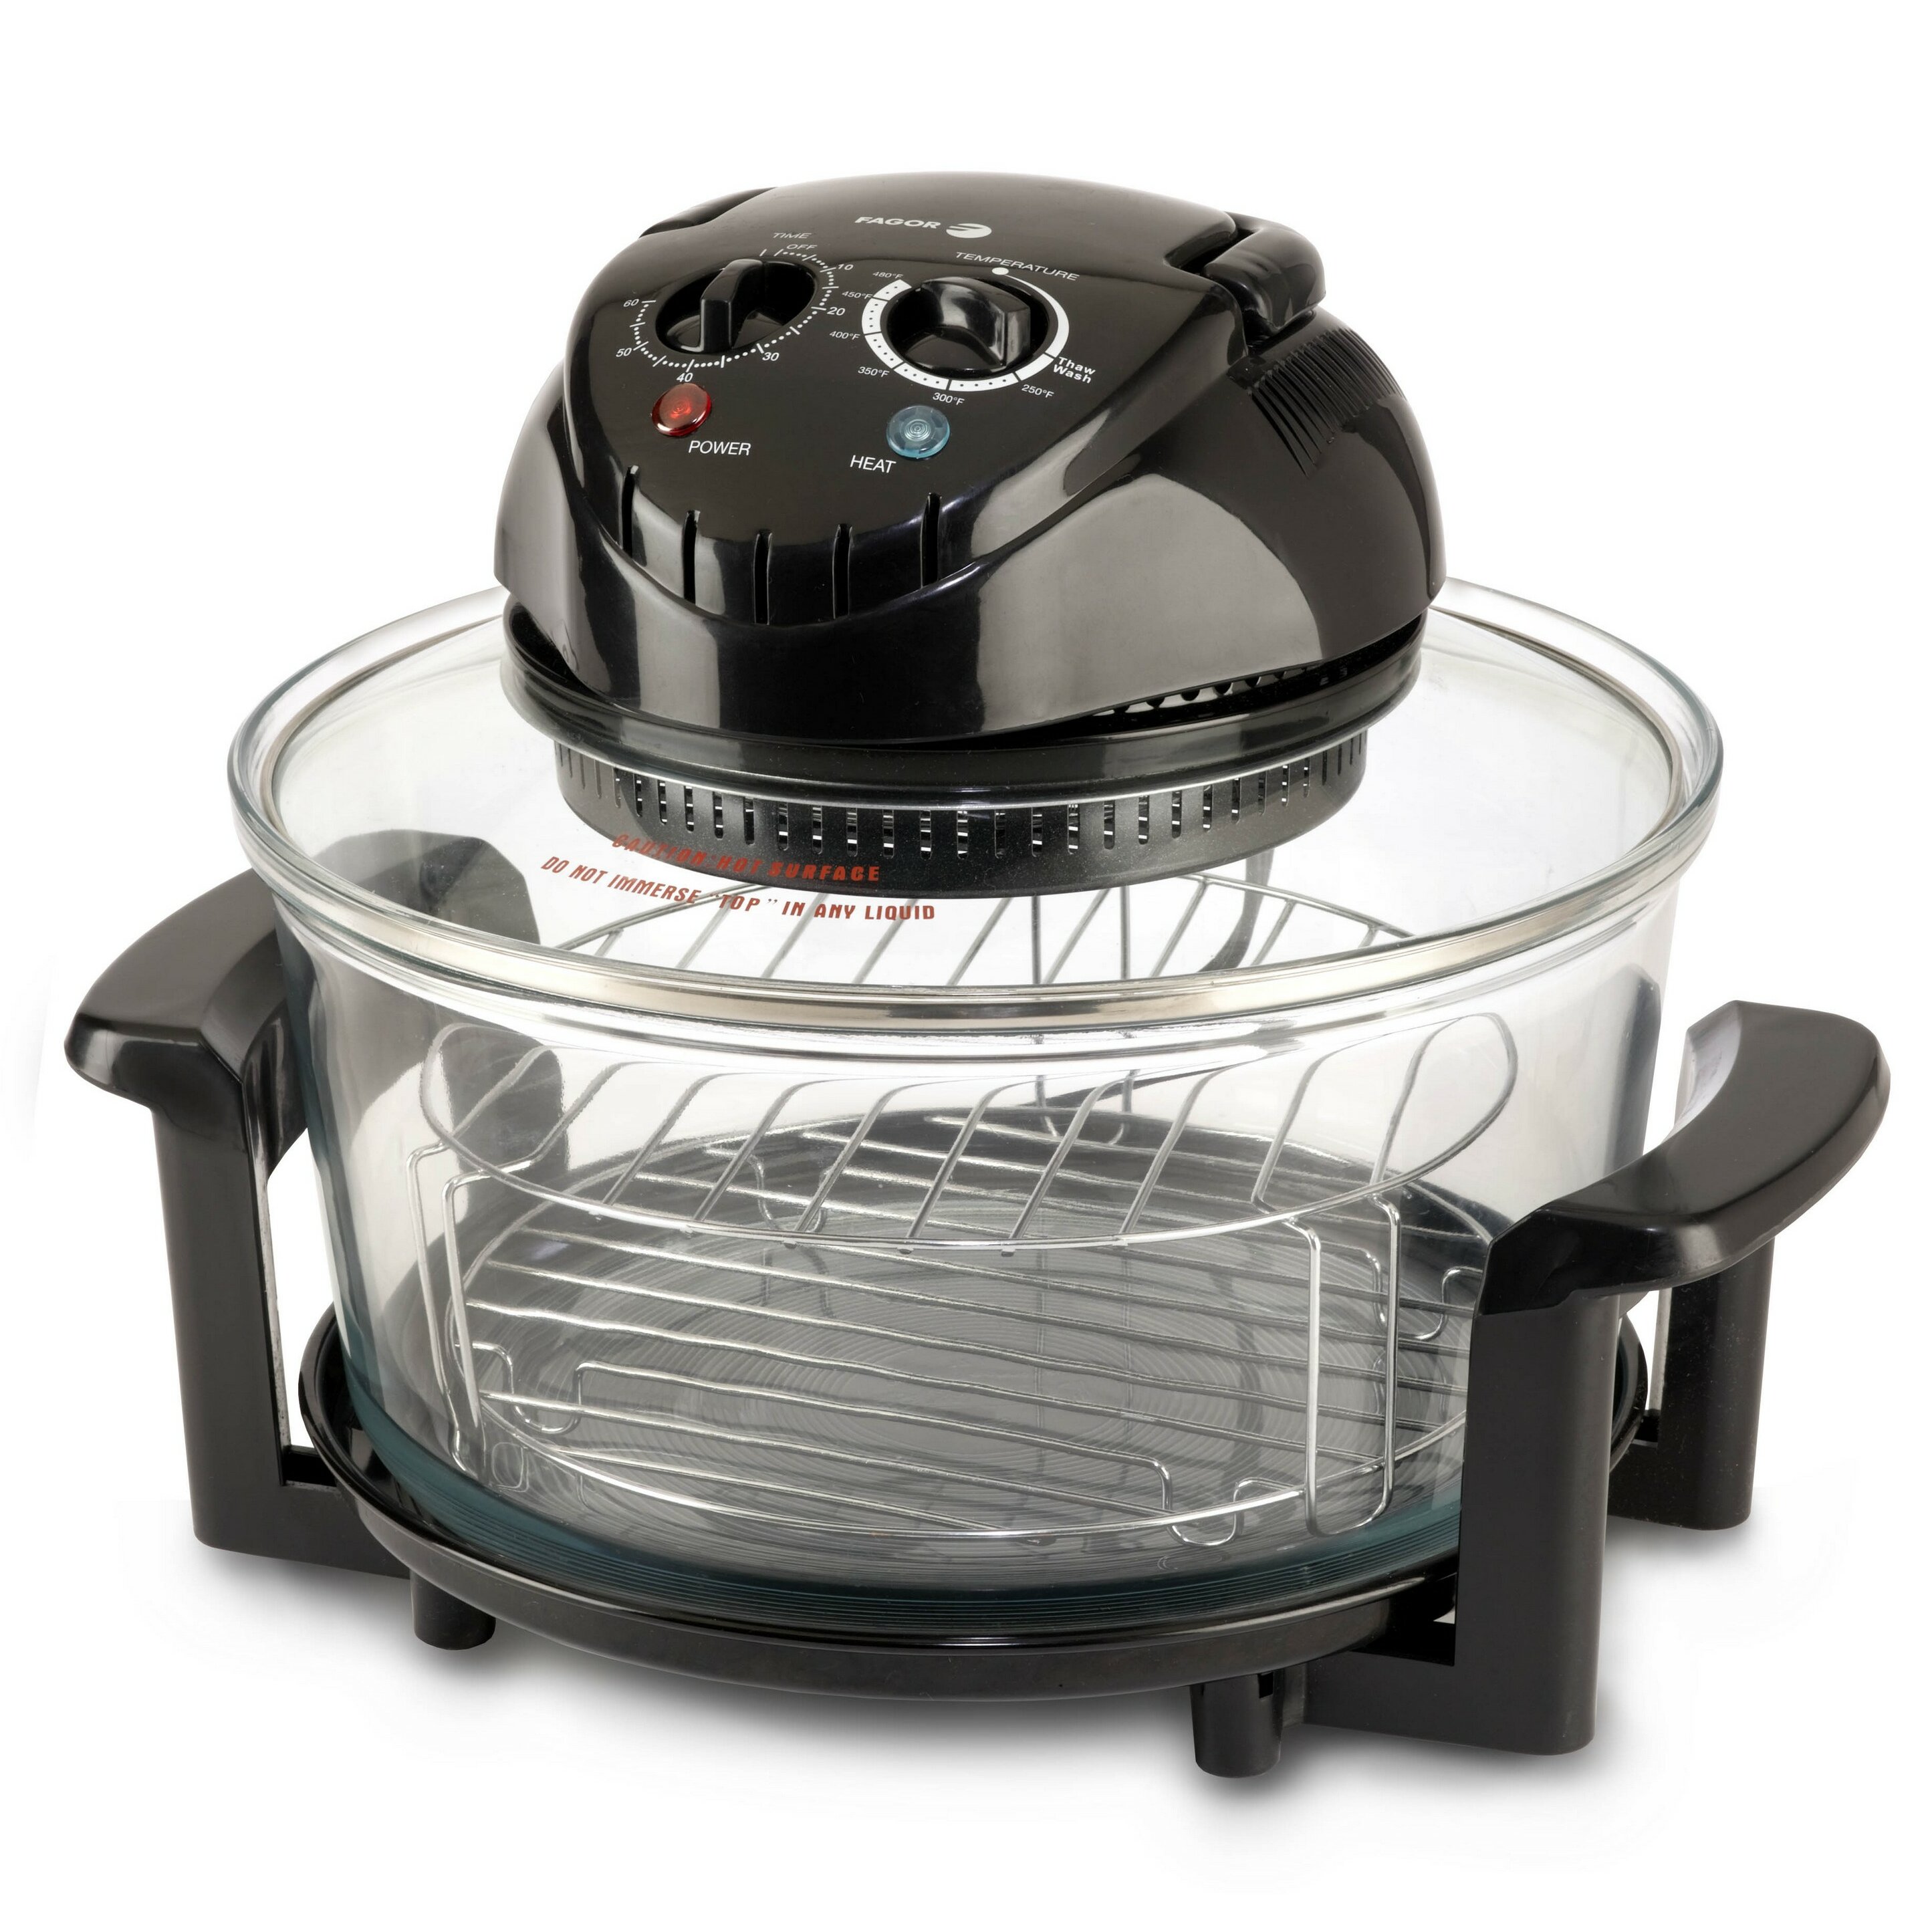 What are some common complaints concerning the Nuwave oven?